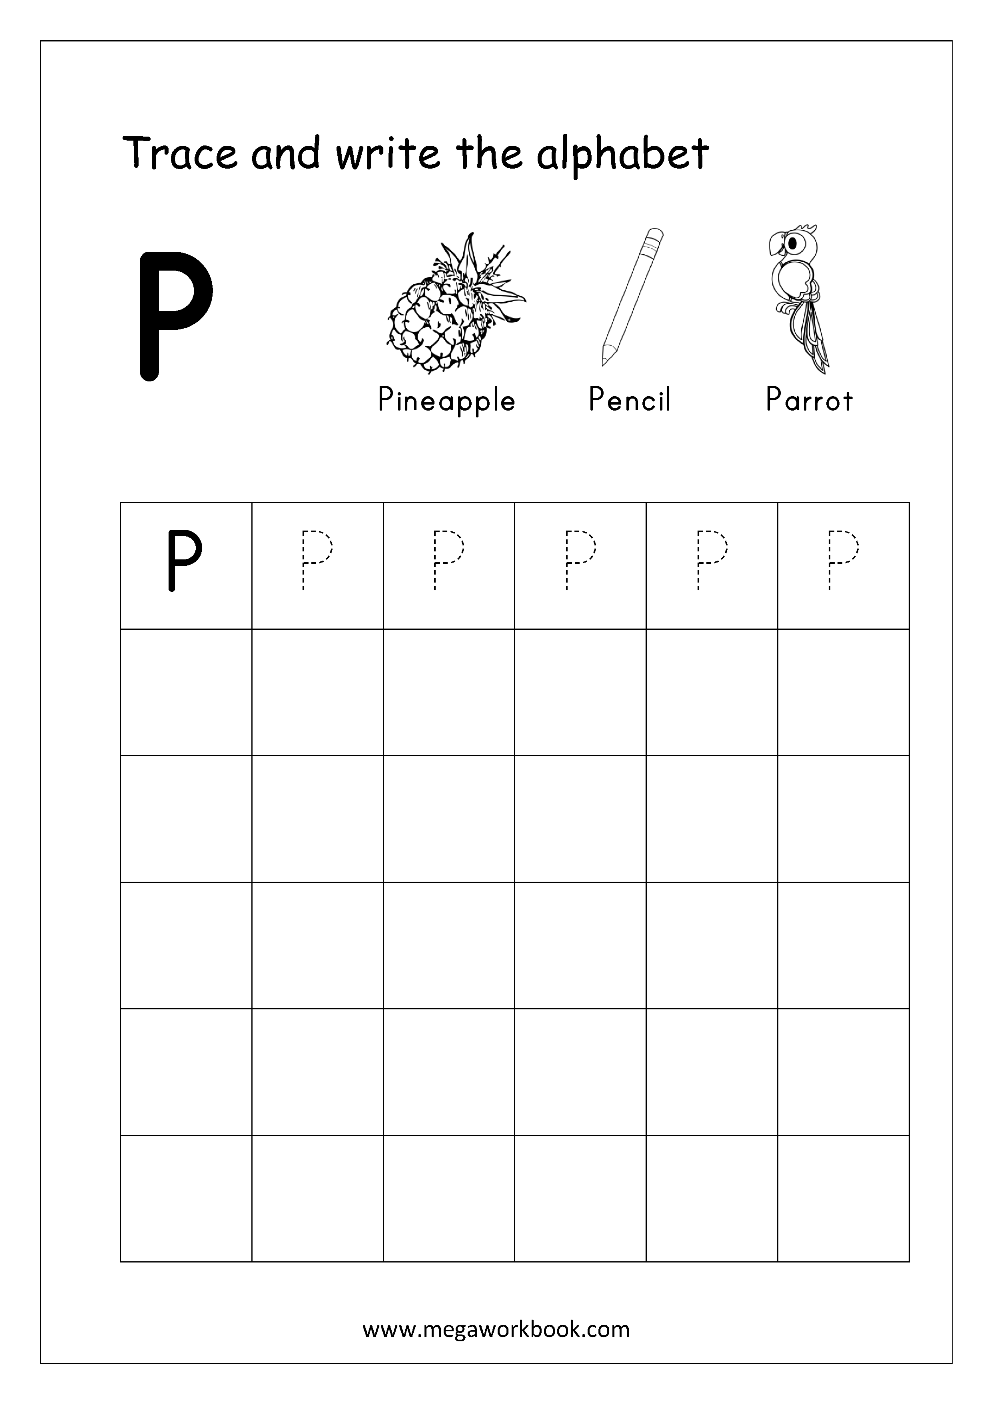 Free English Worksheets - Alphabet Writing (Capital Letters